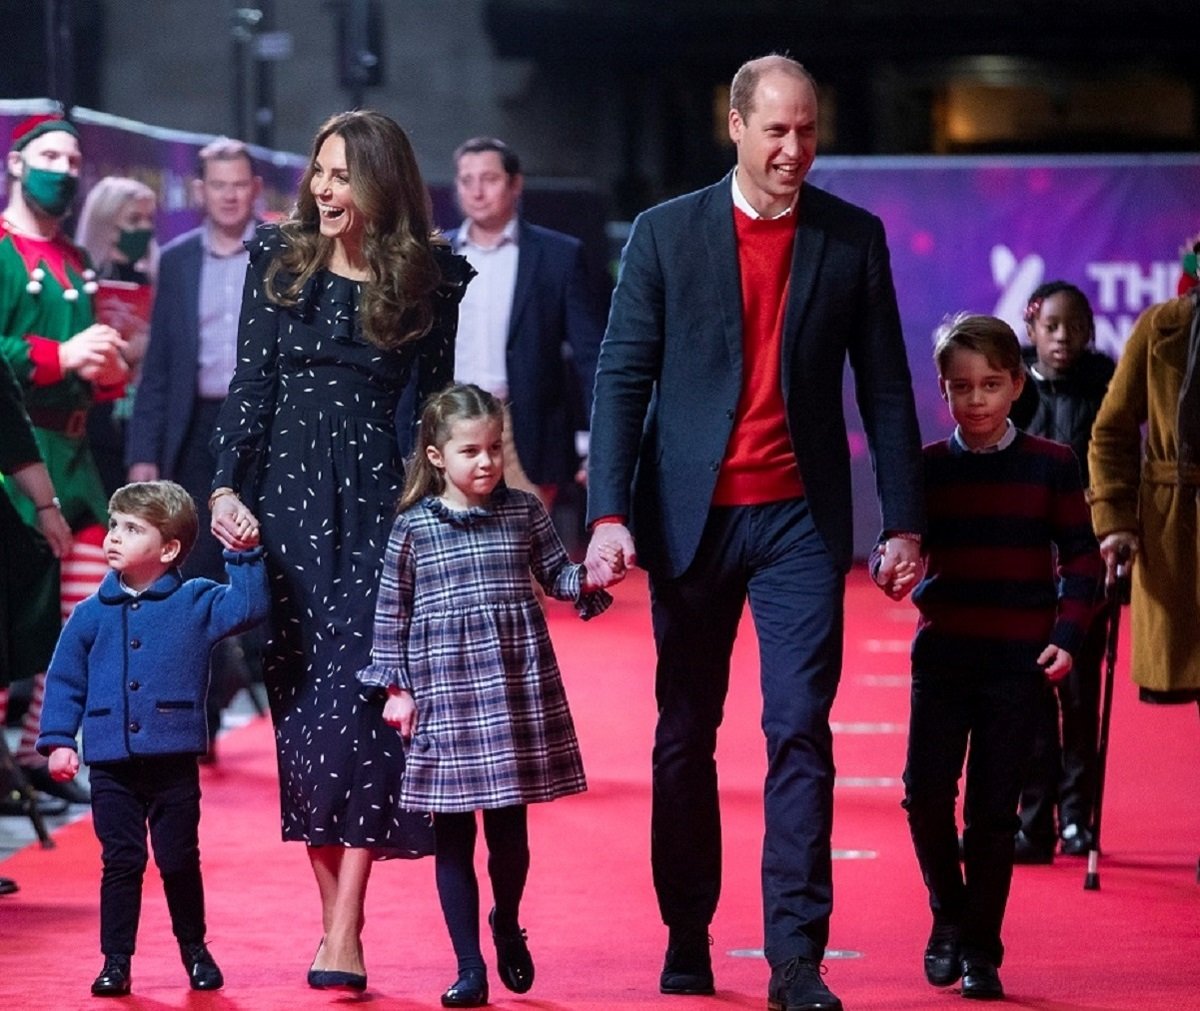 Kate Middleton and Prince William with their kids Prince Louis, Princess Charlotte and Prince George walking the carpet at a special pantomime performance